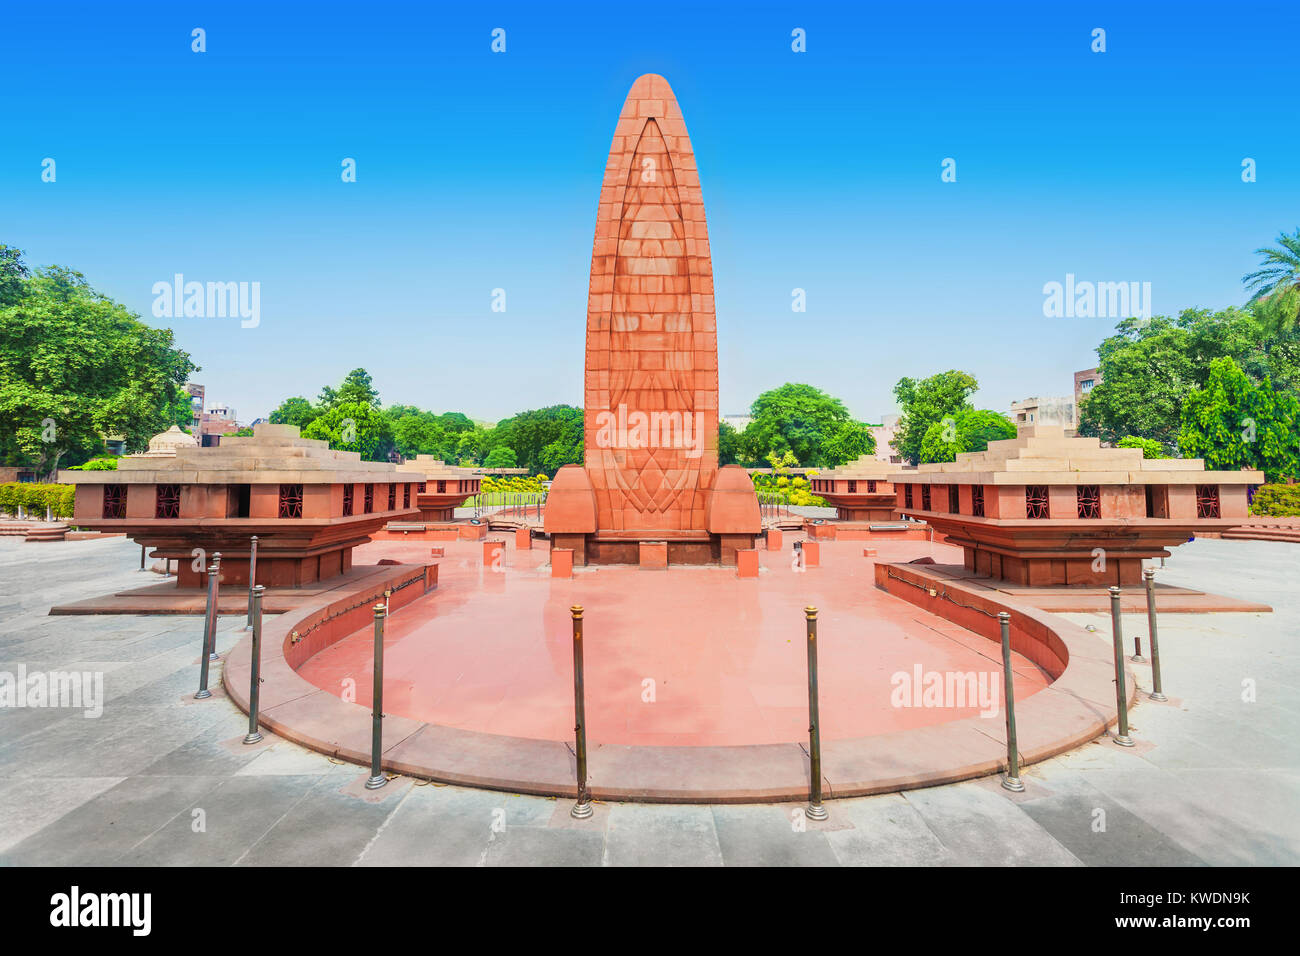 Jallianwala Bagh: Indian outrage over revamp of memorial - BBC News